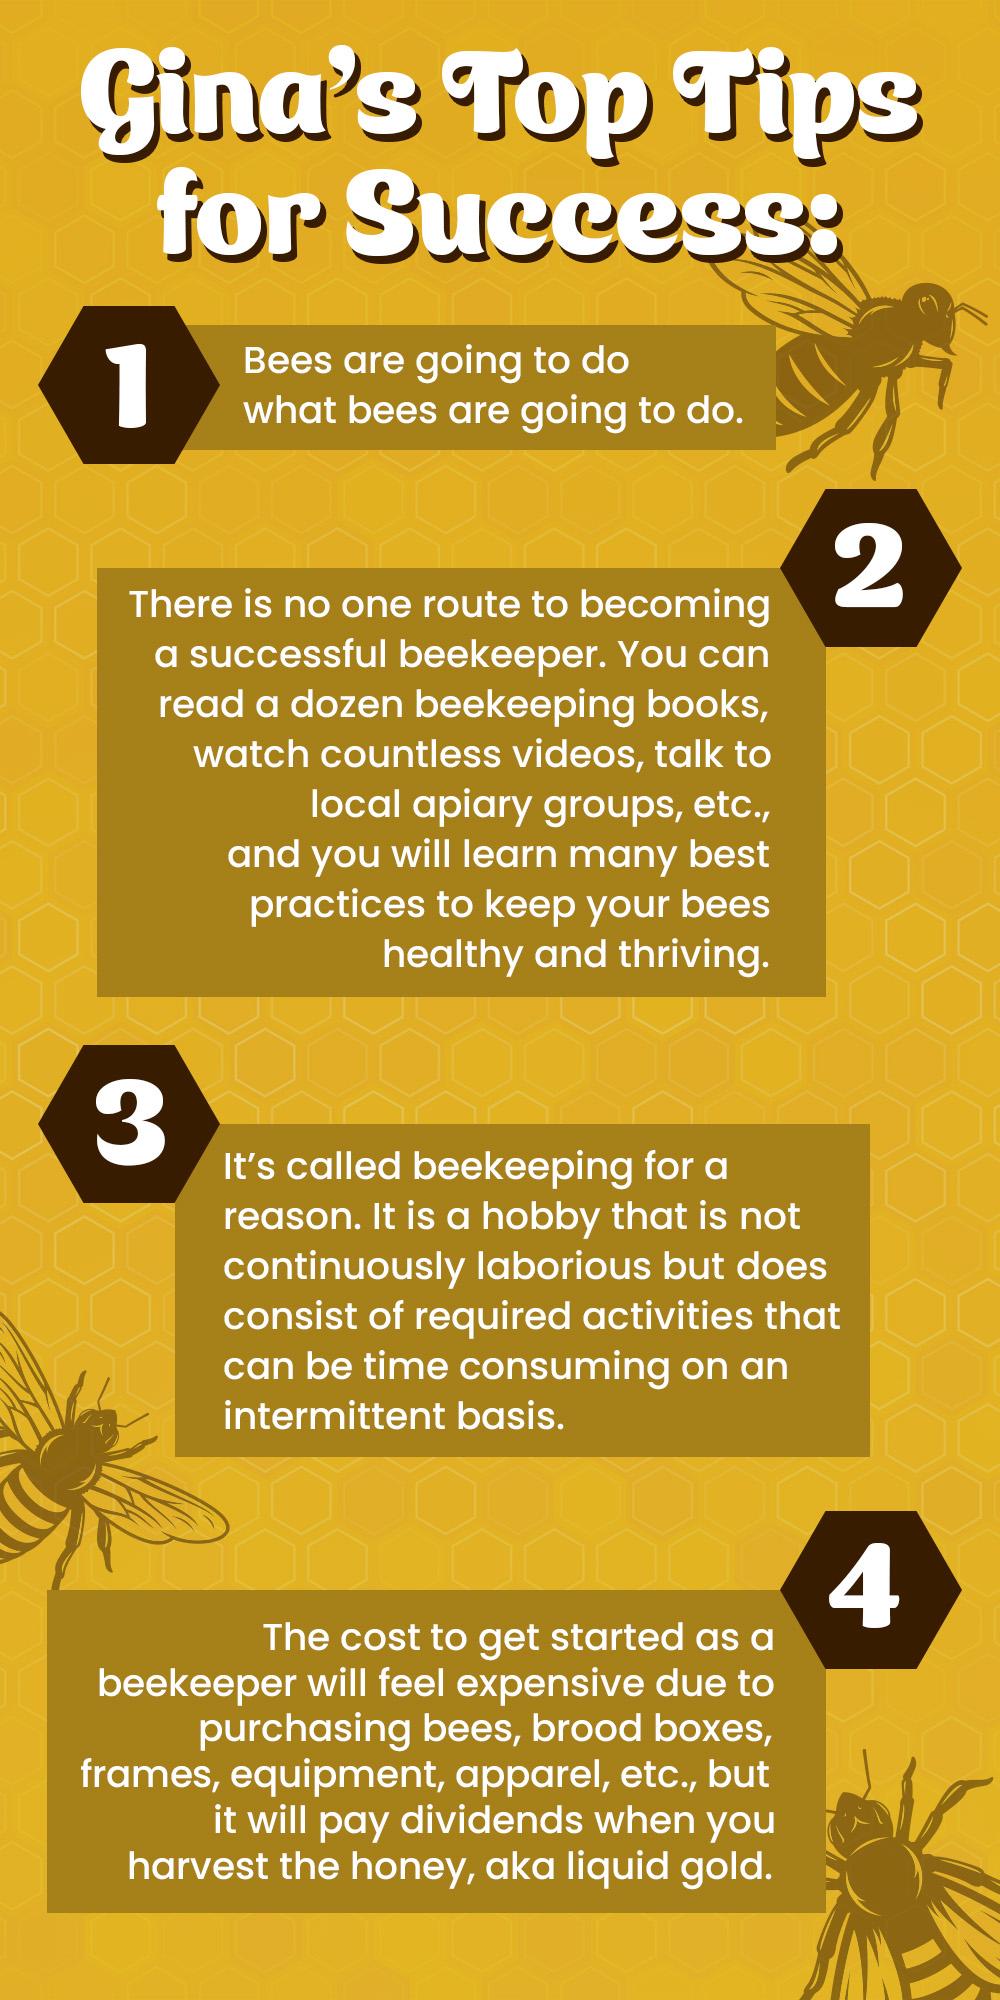 Gina's Top Tips for Success:  Bees are going to do what bees are going to do.There is no one route to becoming a successful beekeeper. You can read a dozen beekeeping books, watch countless videos, talk to local apiary groups, etc., and you will learn many best practices to keep your bees healthy and thriving.It's called beekeeping for a reason. It is a hobby that is not continuously laborious but does consist of required activities that can be time consuming on an intermittent basis.The cost to get started